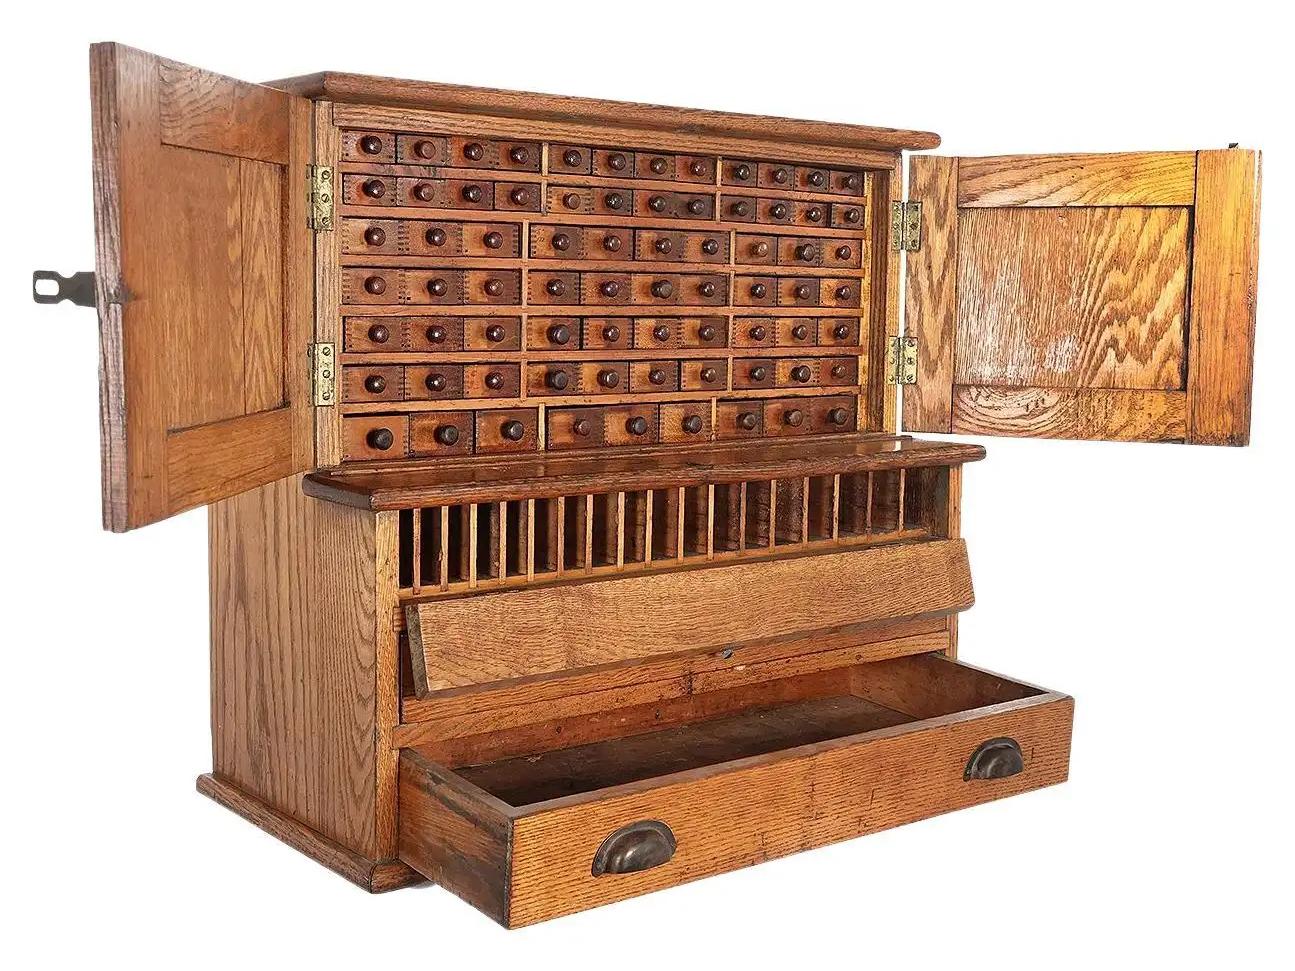 This is it best machinists tool chest we have ever found. It really shows the pride that both the cabinet maker and tool maker had. There are 75 individual finger jointed draws and a horizontal drop down door with graduated compartments. These